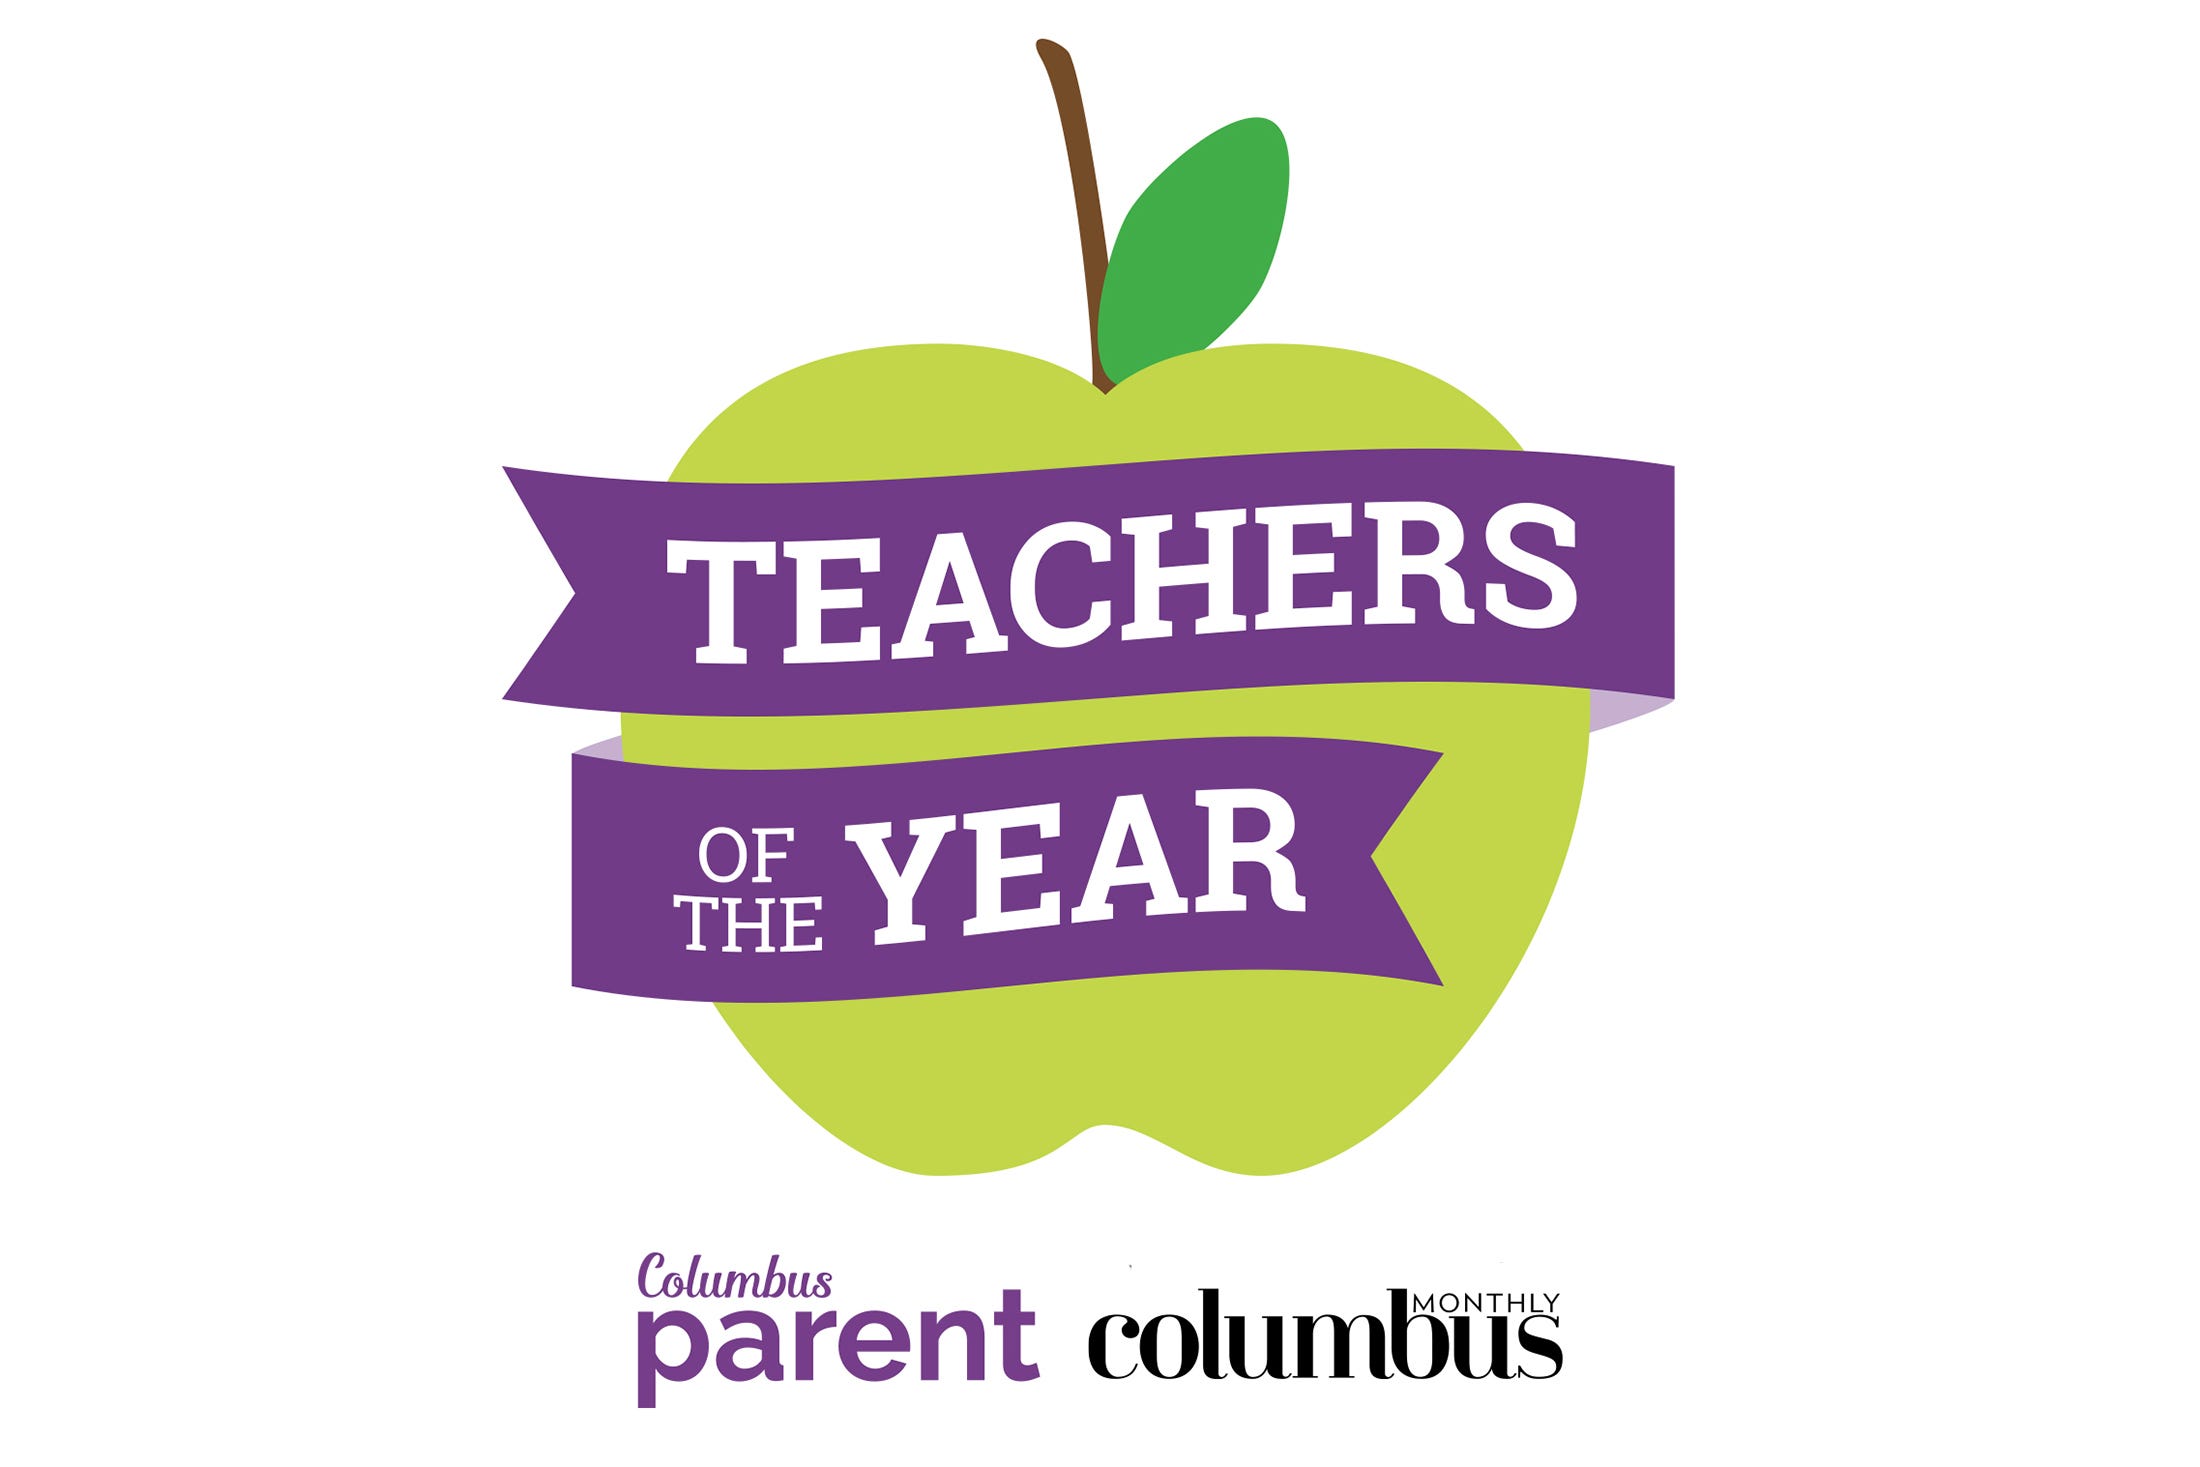 Teachers of the Year honors outstanding K-12 educators across Central Ohio.